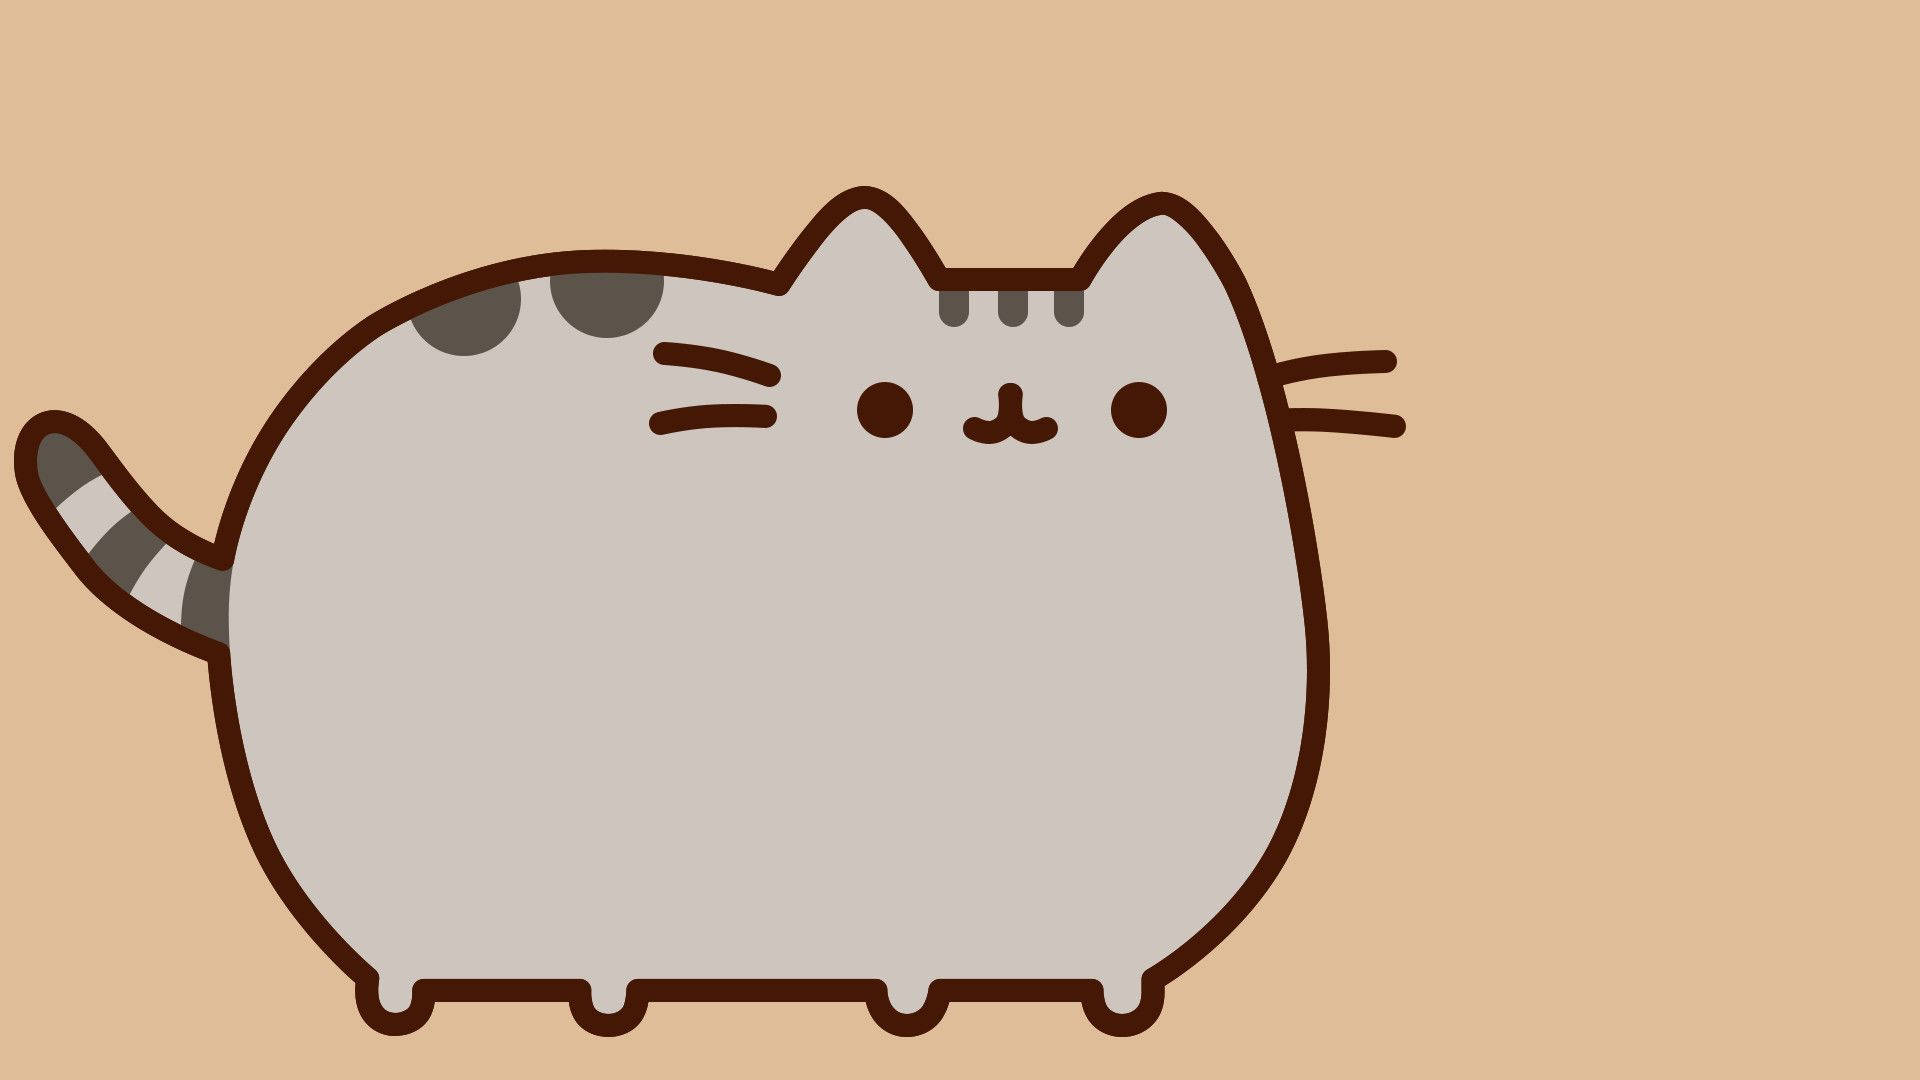 1920X1080 Pusheen Wallpaper and Background